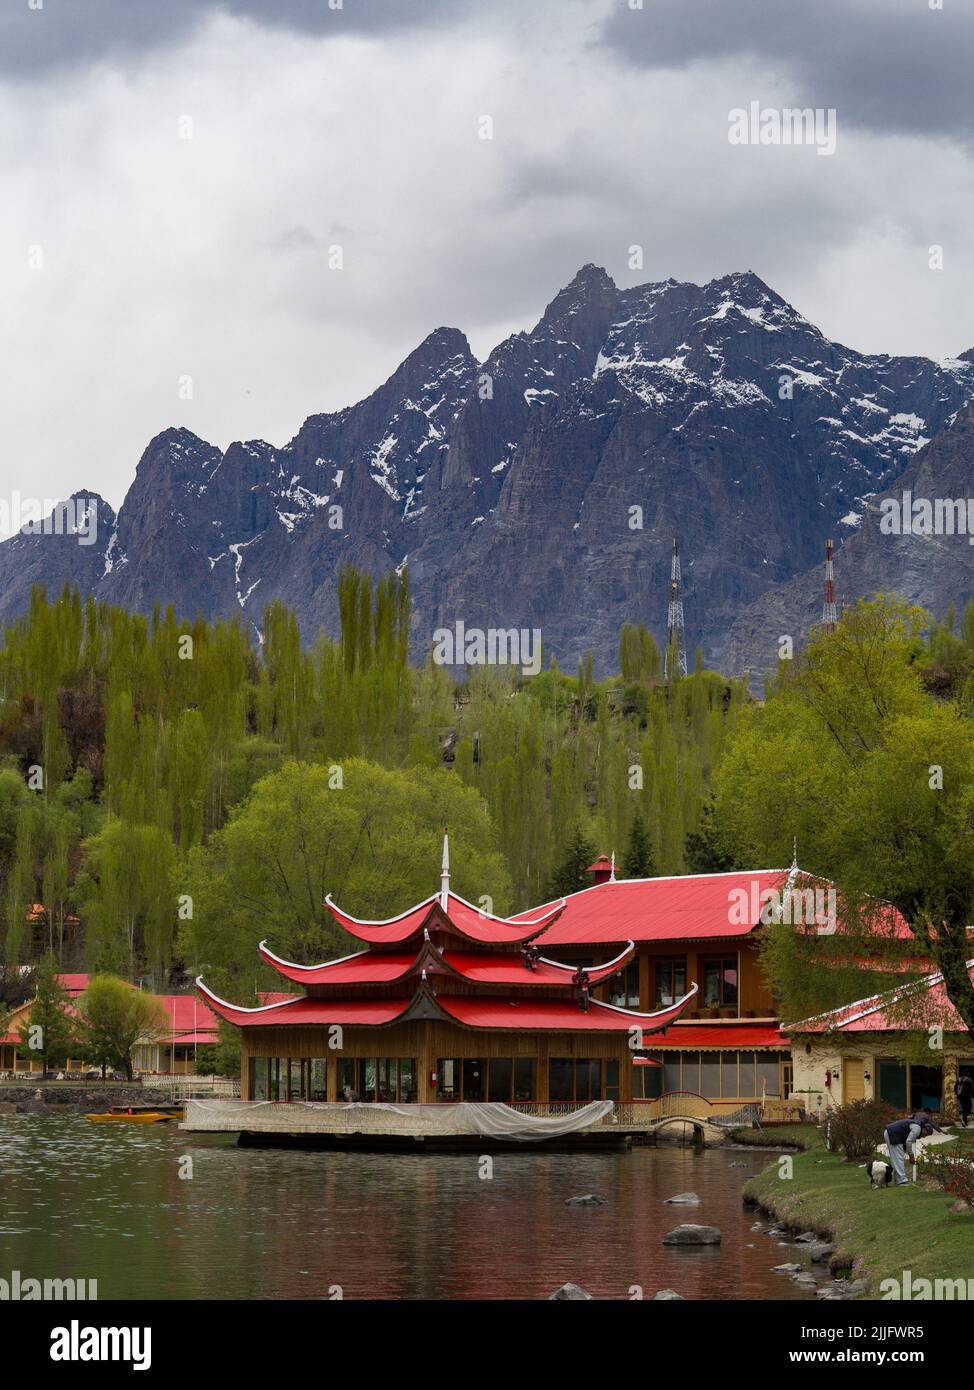 A vertical shot of Asian red-roof buildings on the shore of Upper Kachura Lake in Skardu, Pakistan Stock Photo